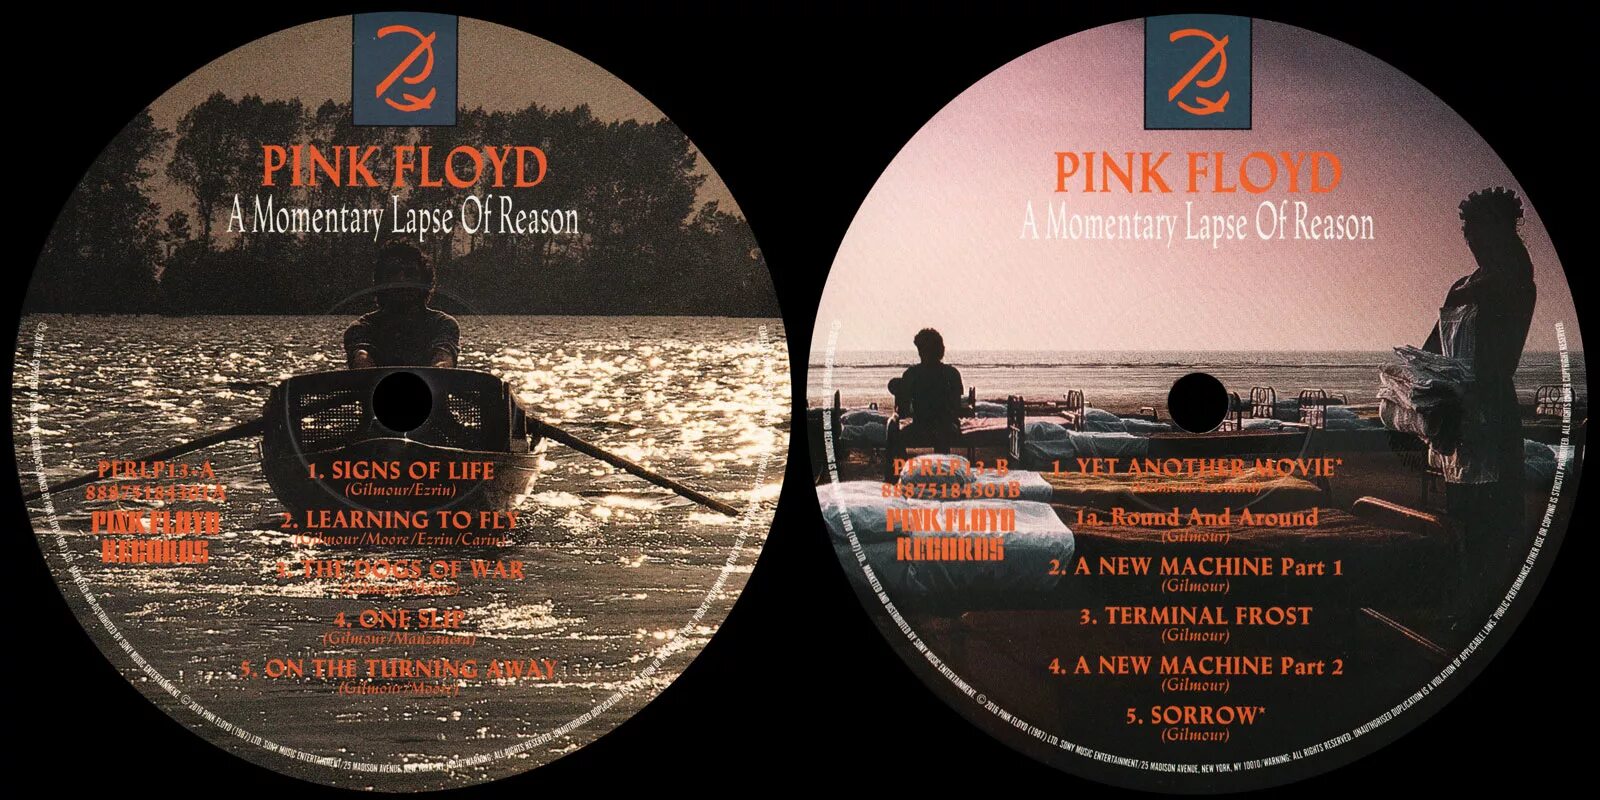 Momentary lapse of reasoning. Pink Floyd a Momentary lapse of reason 1987. Pink Floyd 1987 a Momentary lapse of reason 2021. A Momentary lapse of reason обложка. Pink Floyd a Momentary lapse of reason обложка.